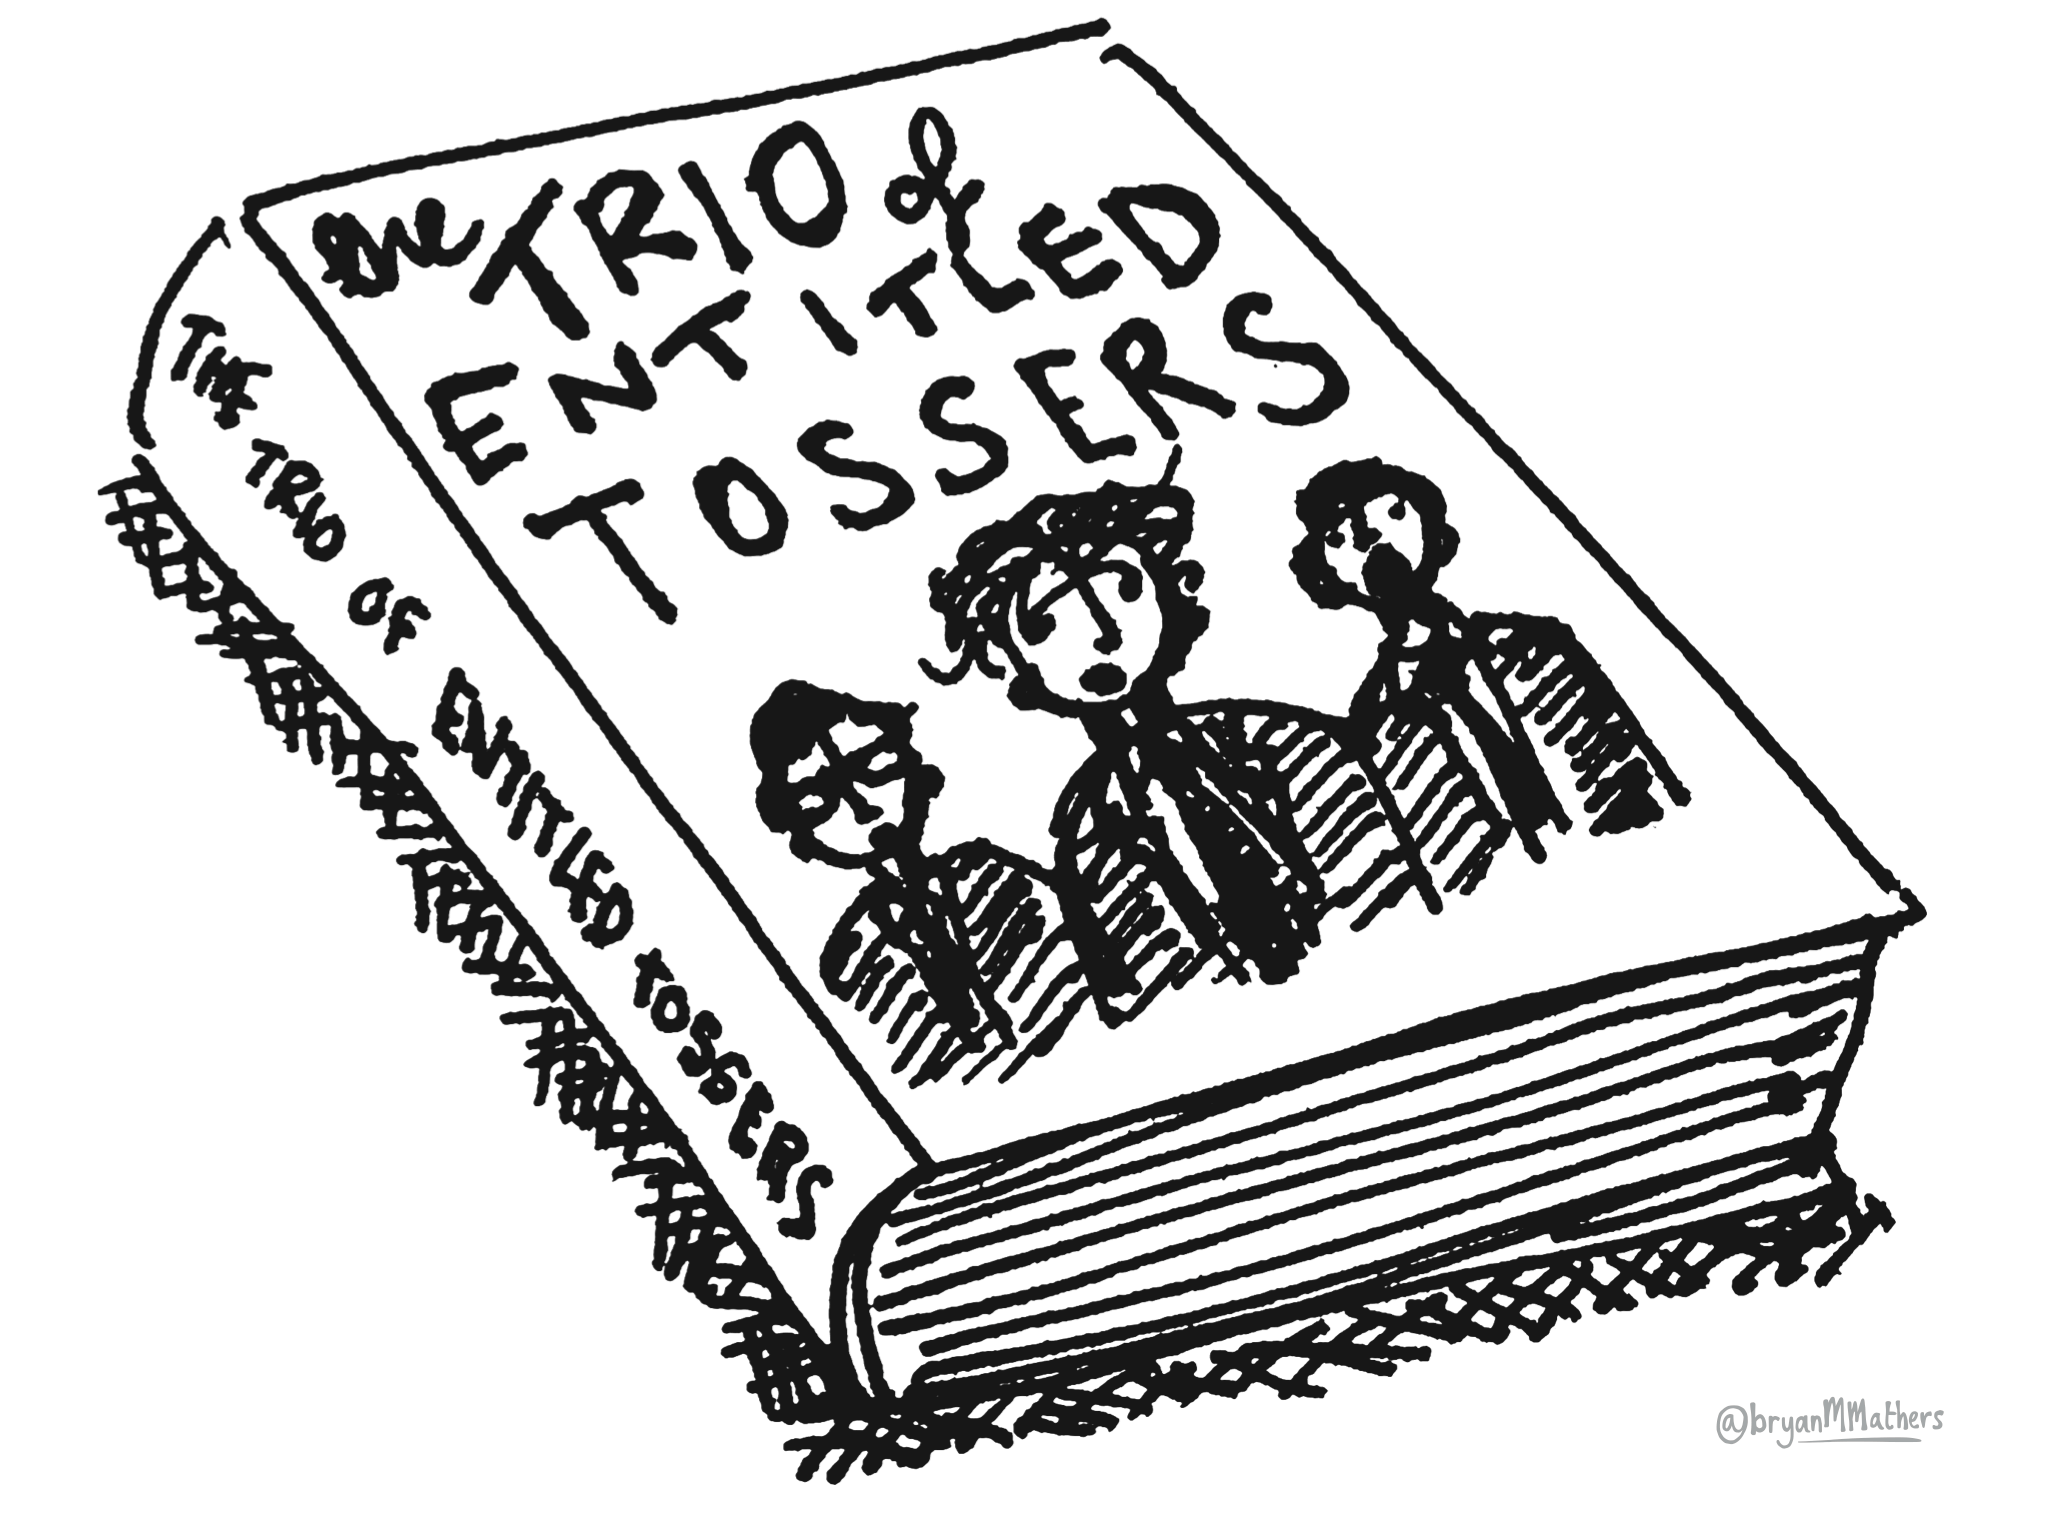 The trio of entitled tossers